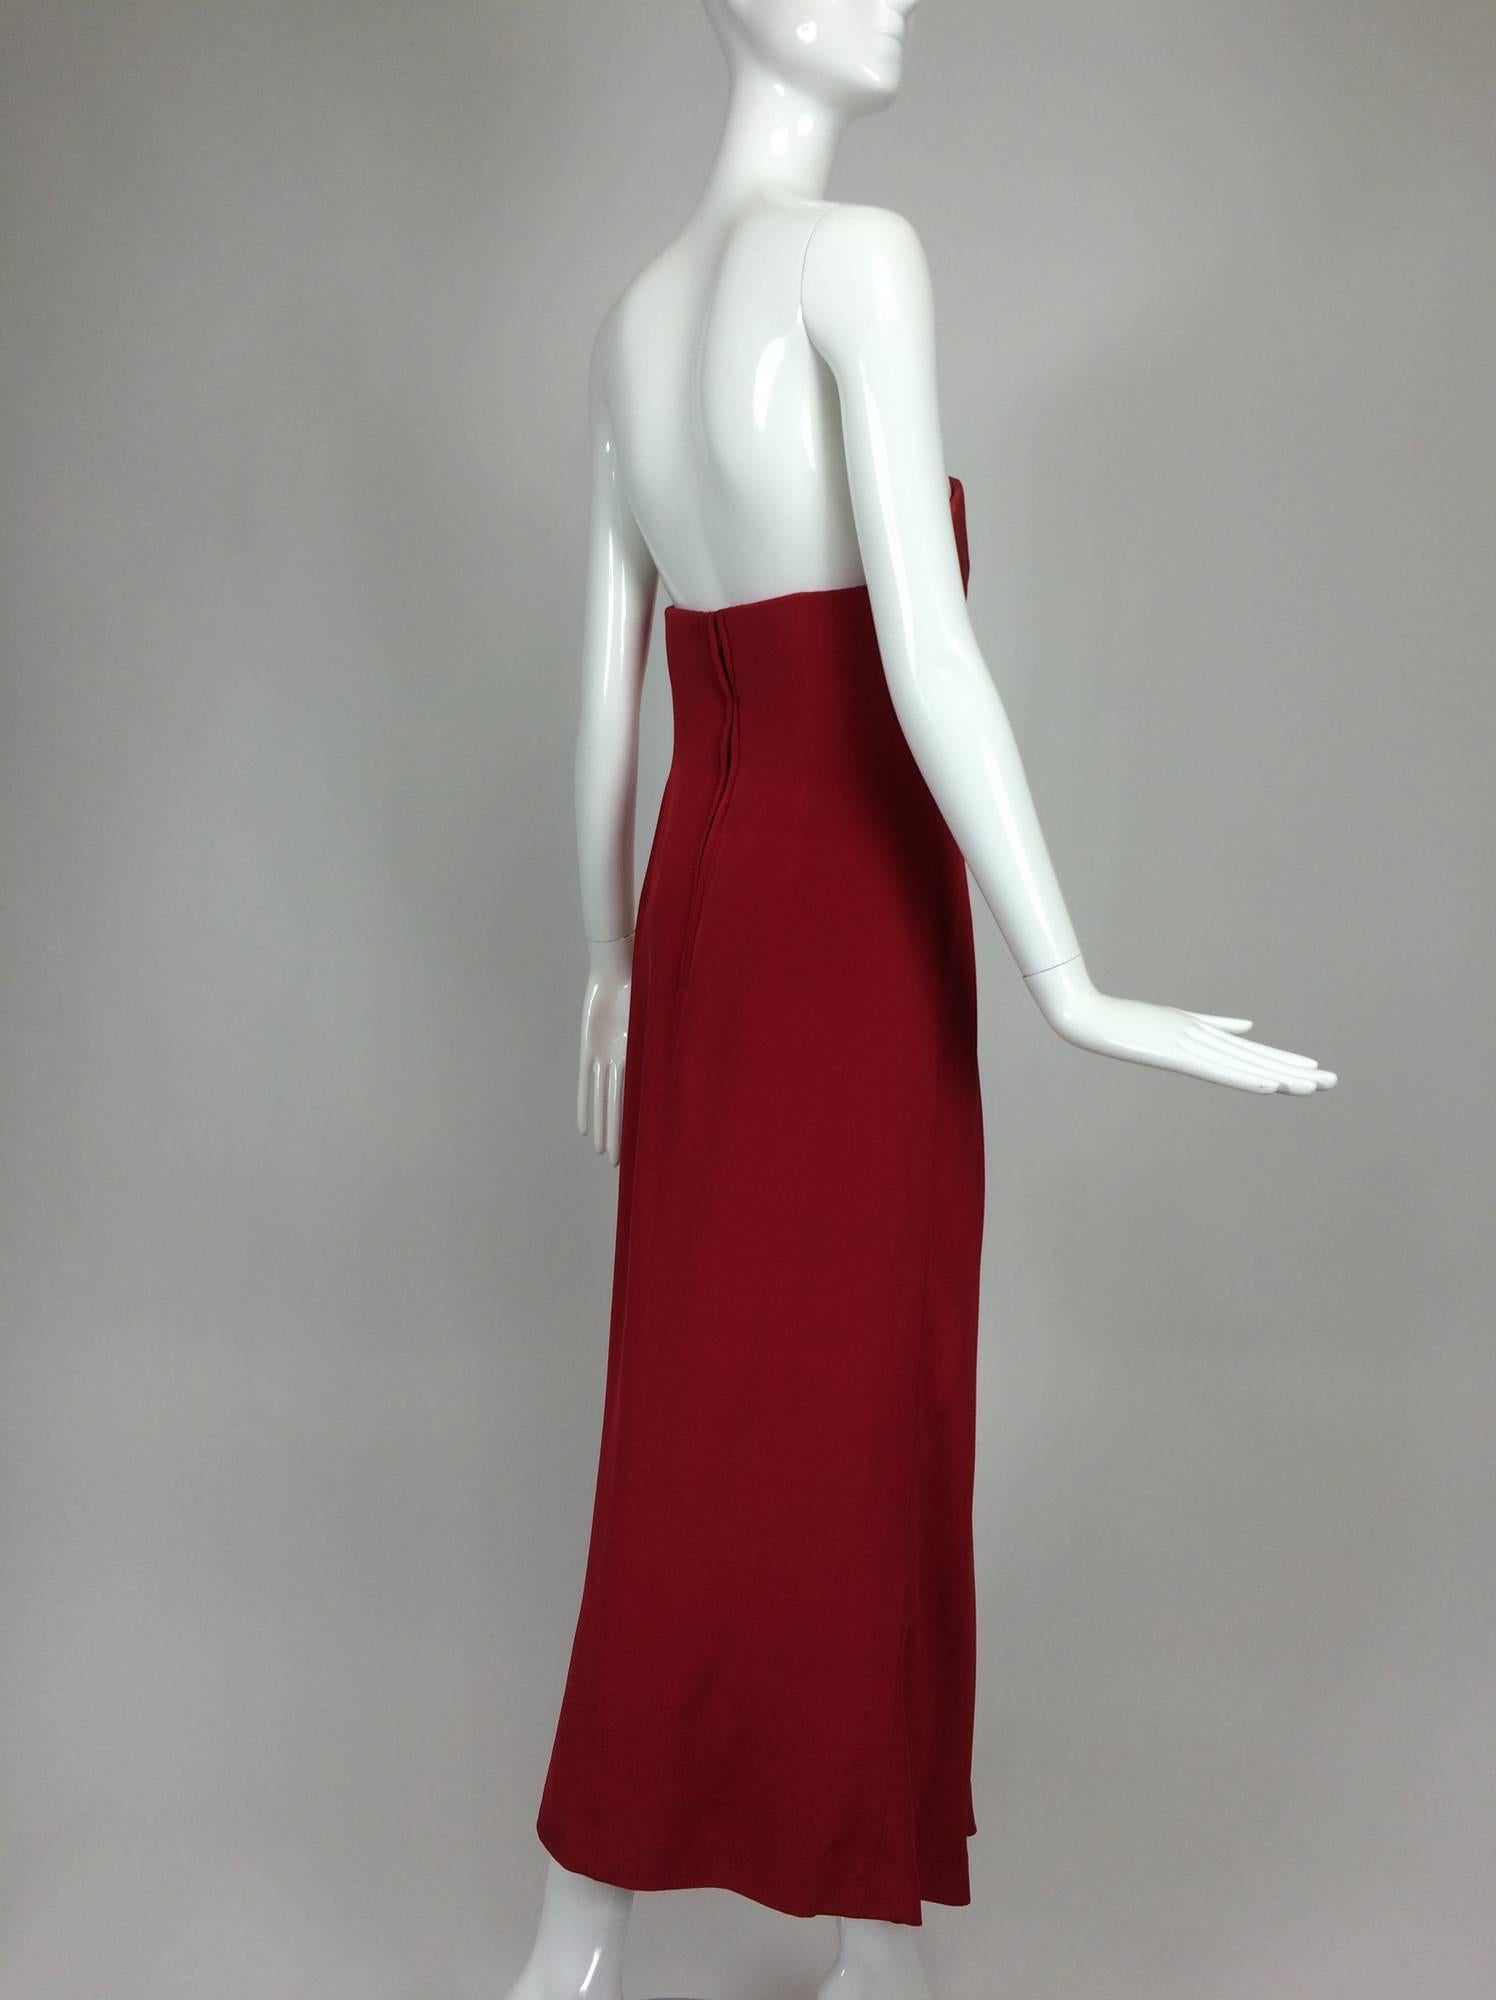 Fabulous John Anthony candy apple red silk strapless column gown 1980s 2